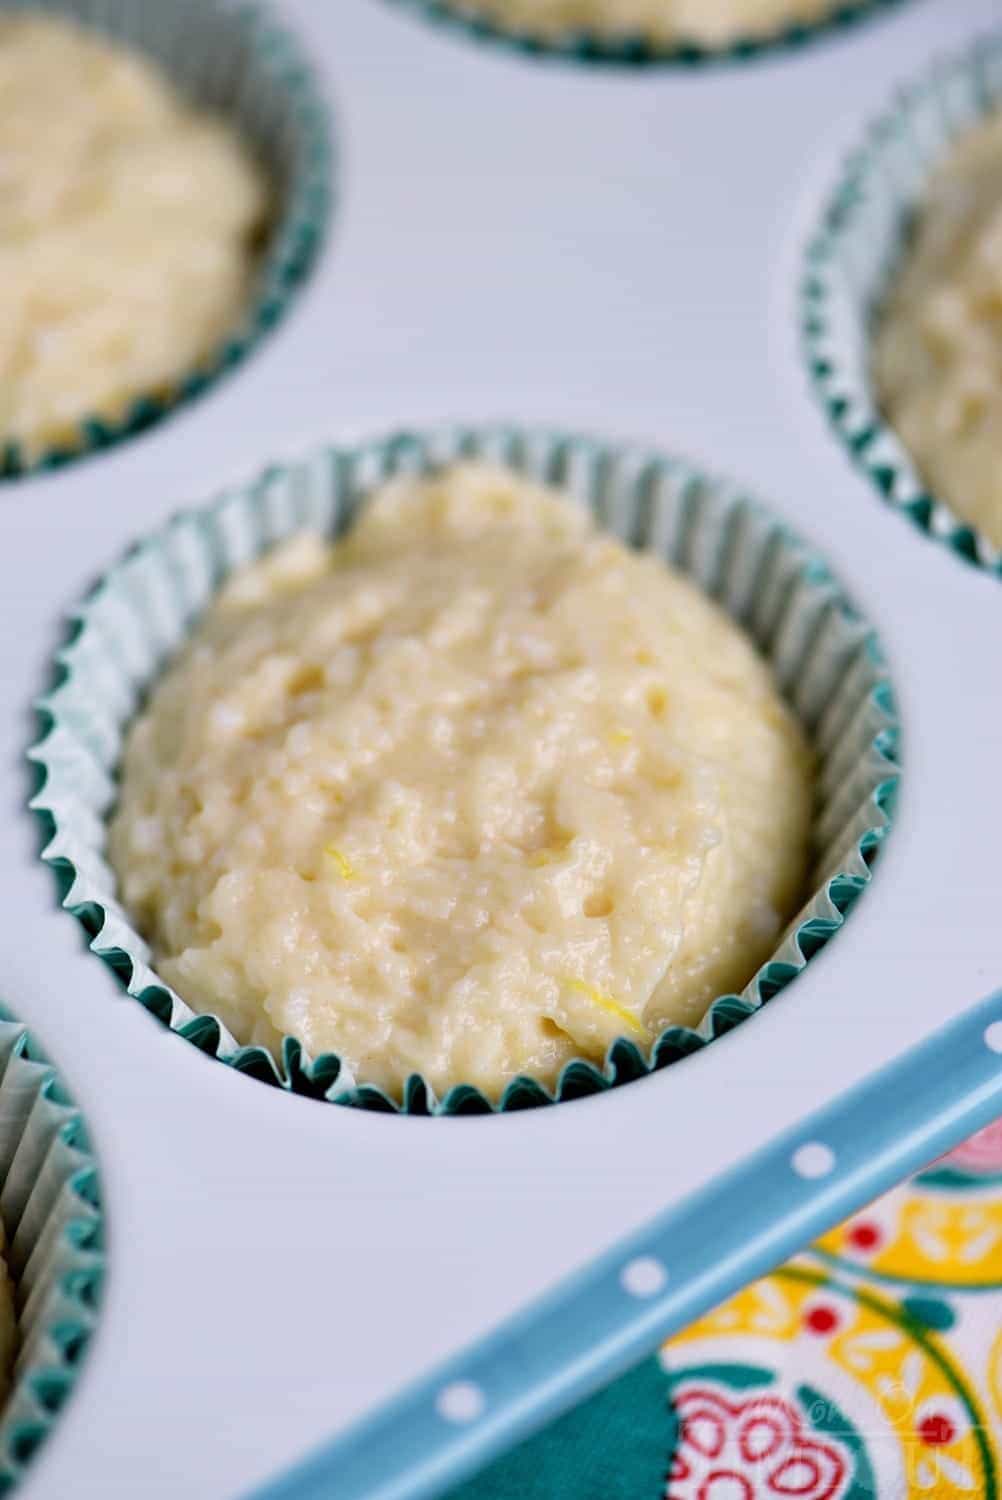 These Skinny Lemon Muffins are made with Greek yogurt, coconut oil and plenty of lemon zest for a fabulous bright, lemon flavor! So tender and moist, these muffins are a great way to start to your day! // Mom On Timeout